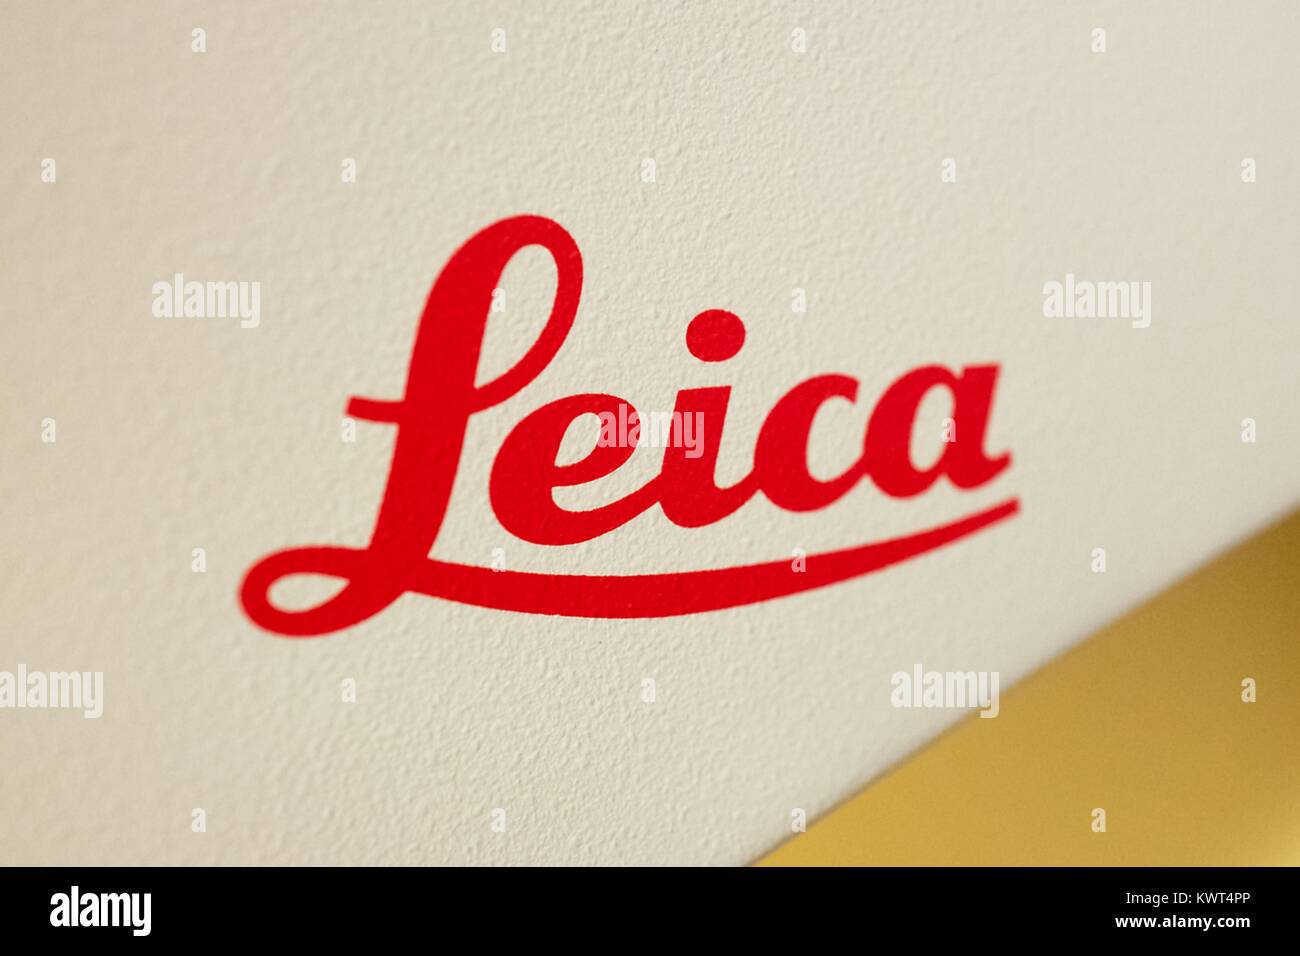 Close-up of logo for German medical, scientific and high-end camera equipment manufacturer Leica, on the side of a medical device at a hospital in Walnut Creek, California, September 28, 2017. () Stock Photo